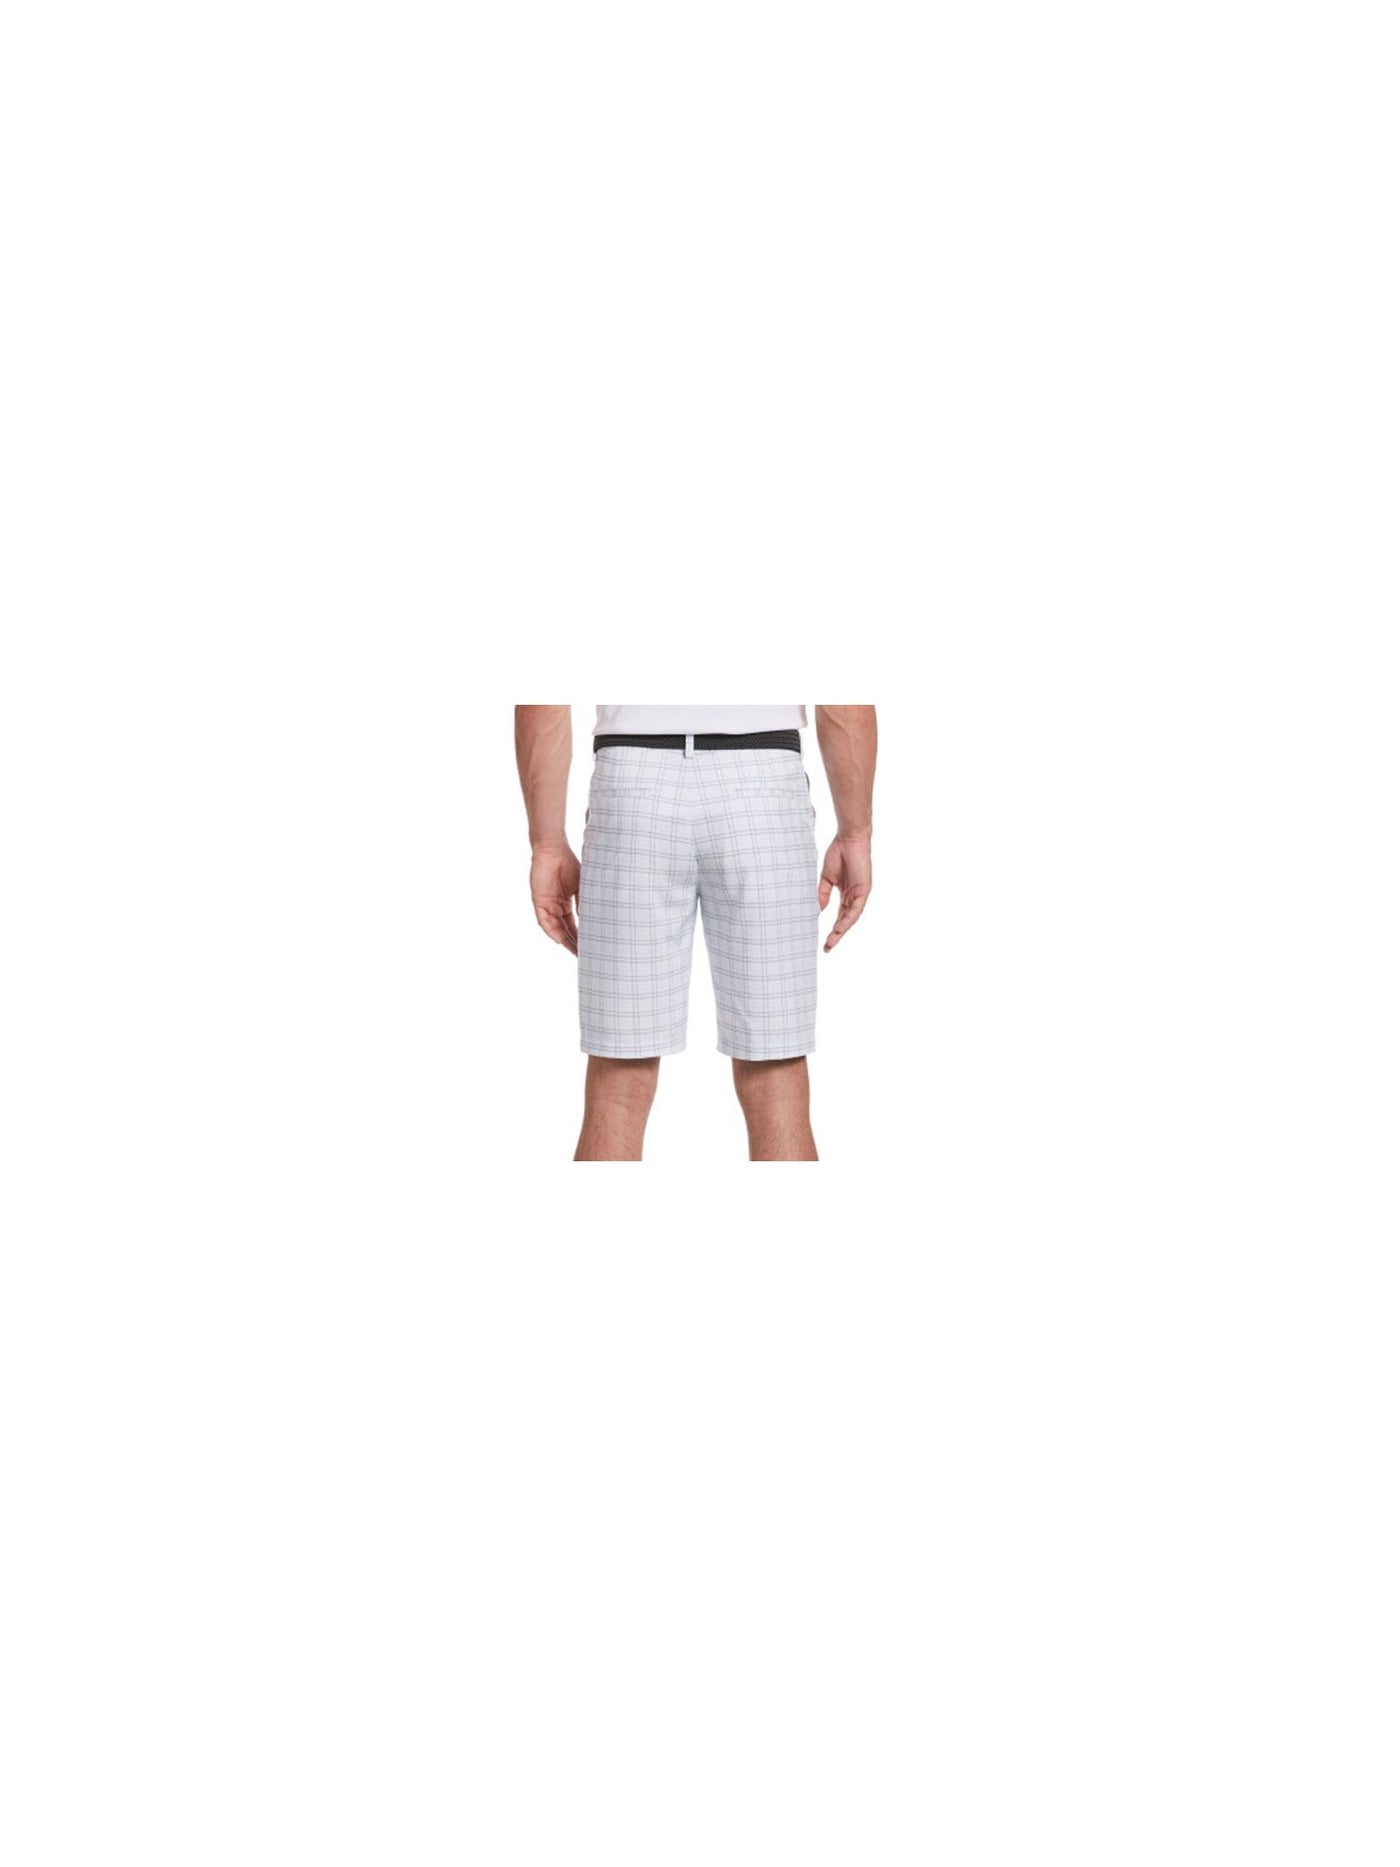 HYBRID APPAREL Mens White Flat Front, Printed Stretch Shorts 42